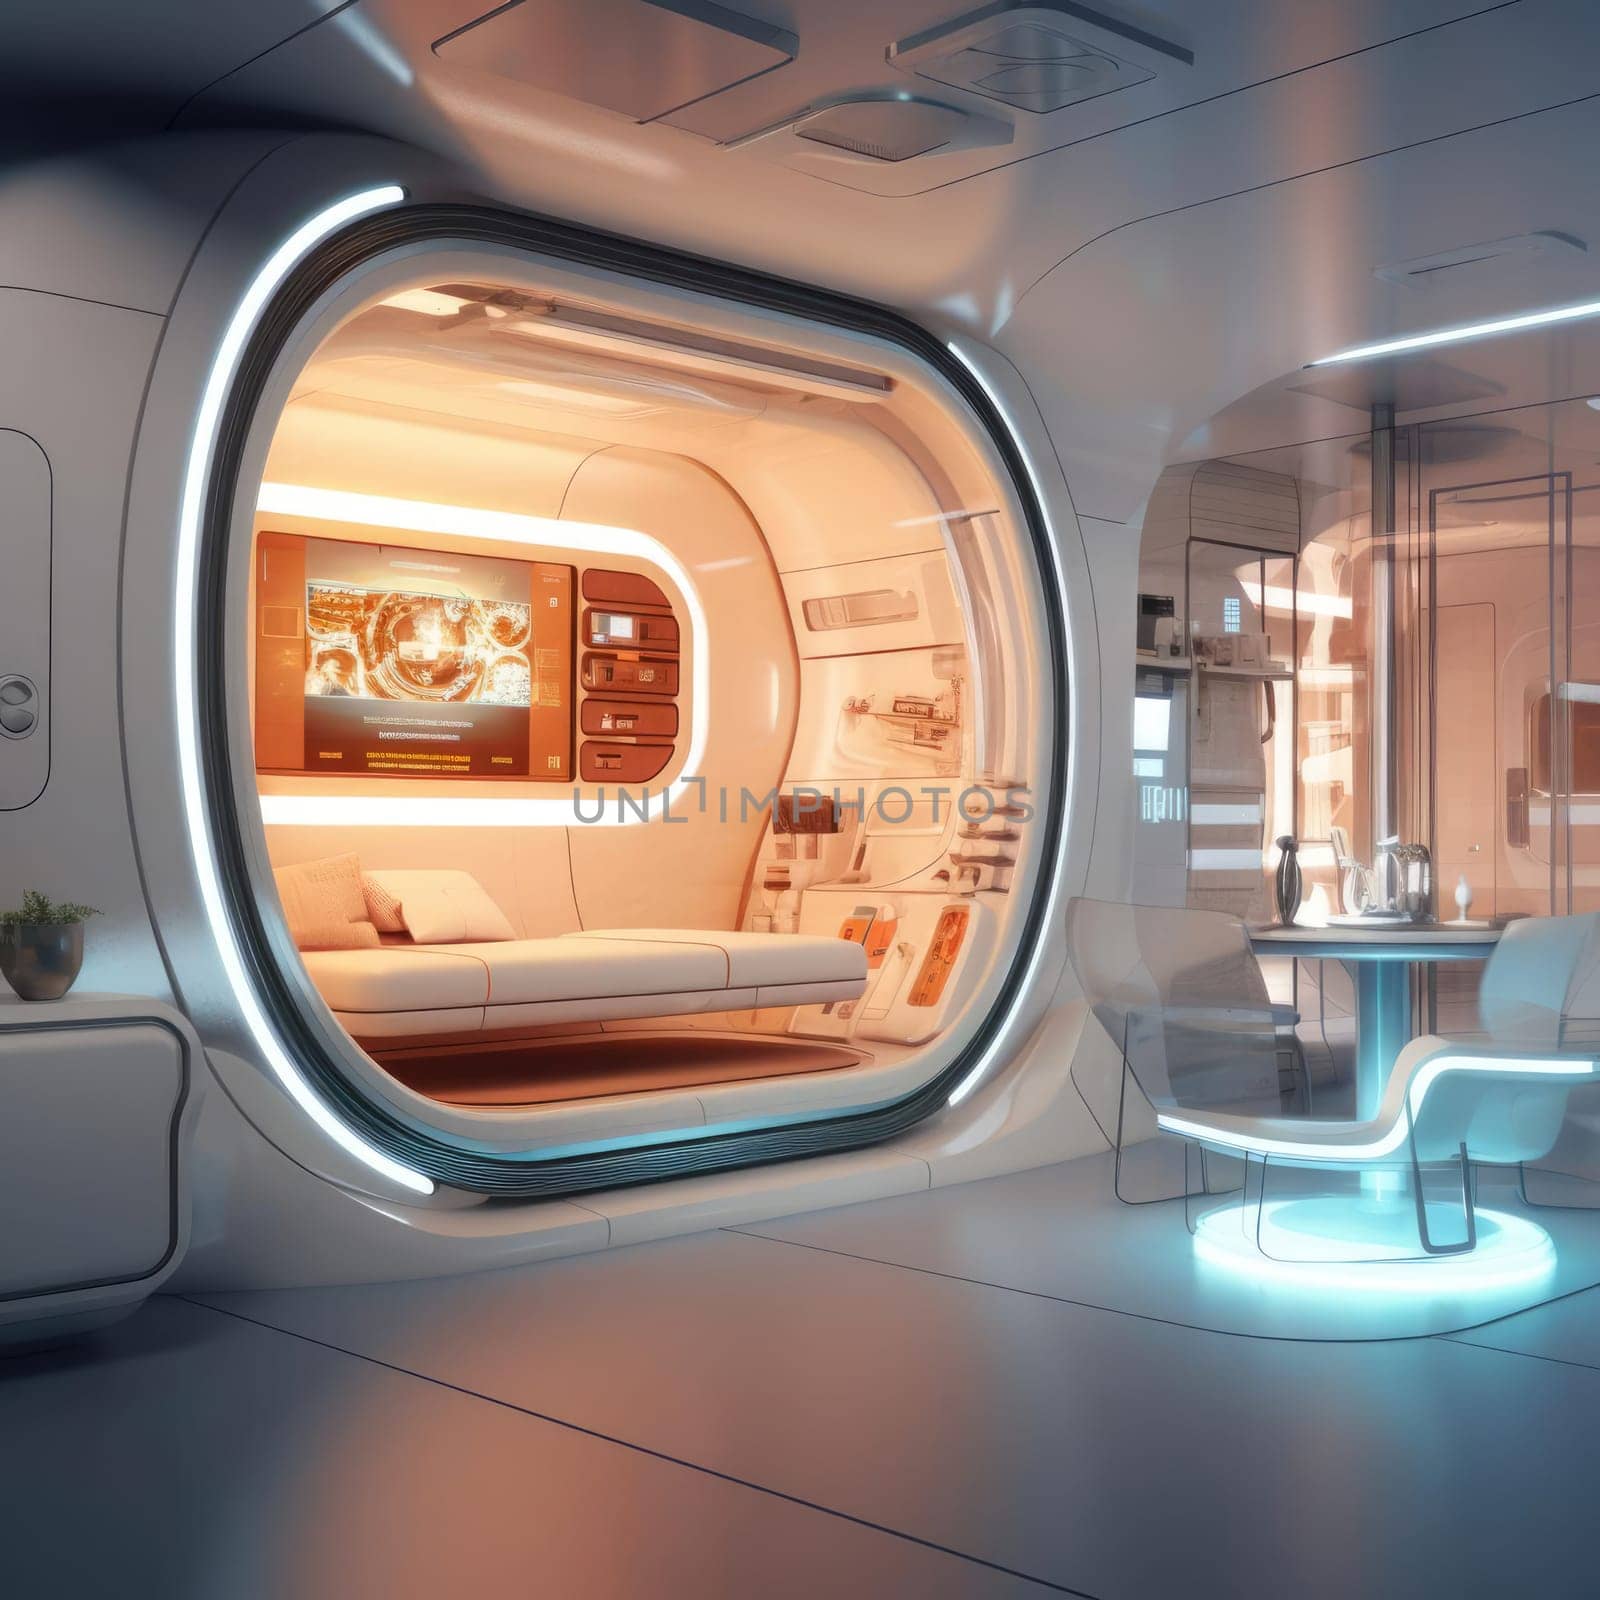 Capsule type apartment, high technology by cherezoff